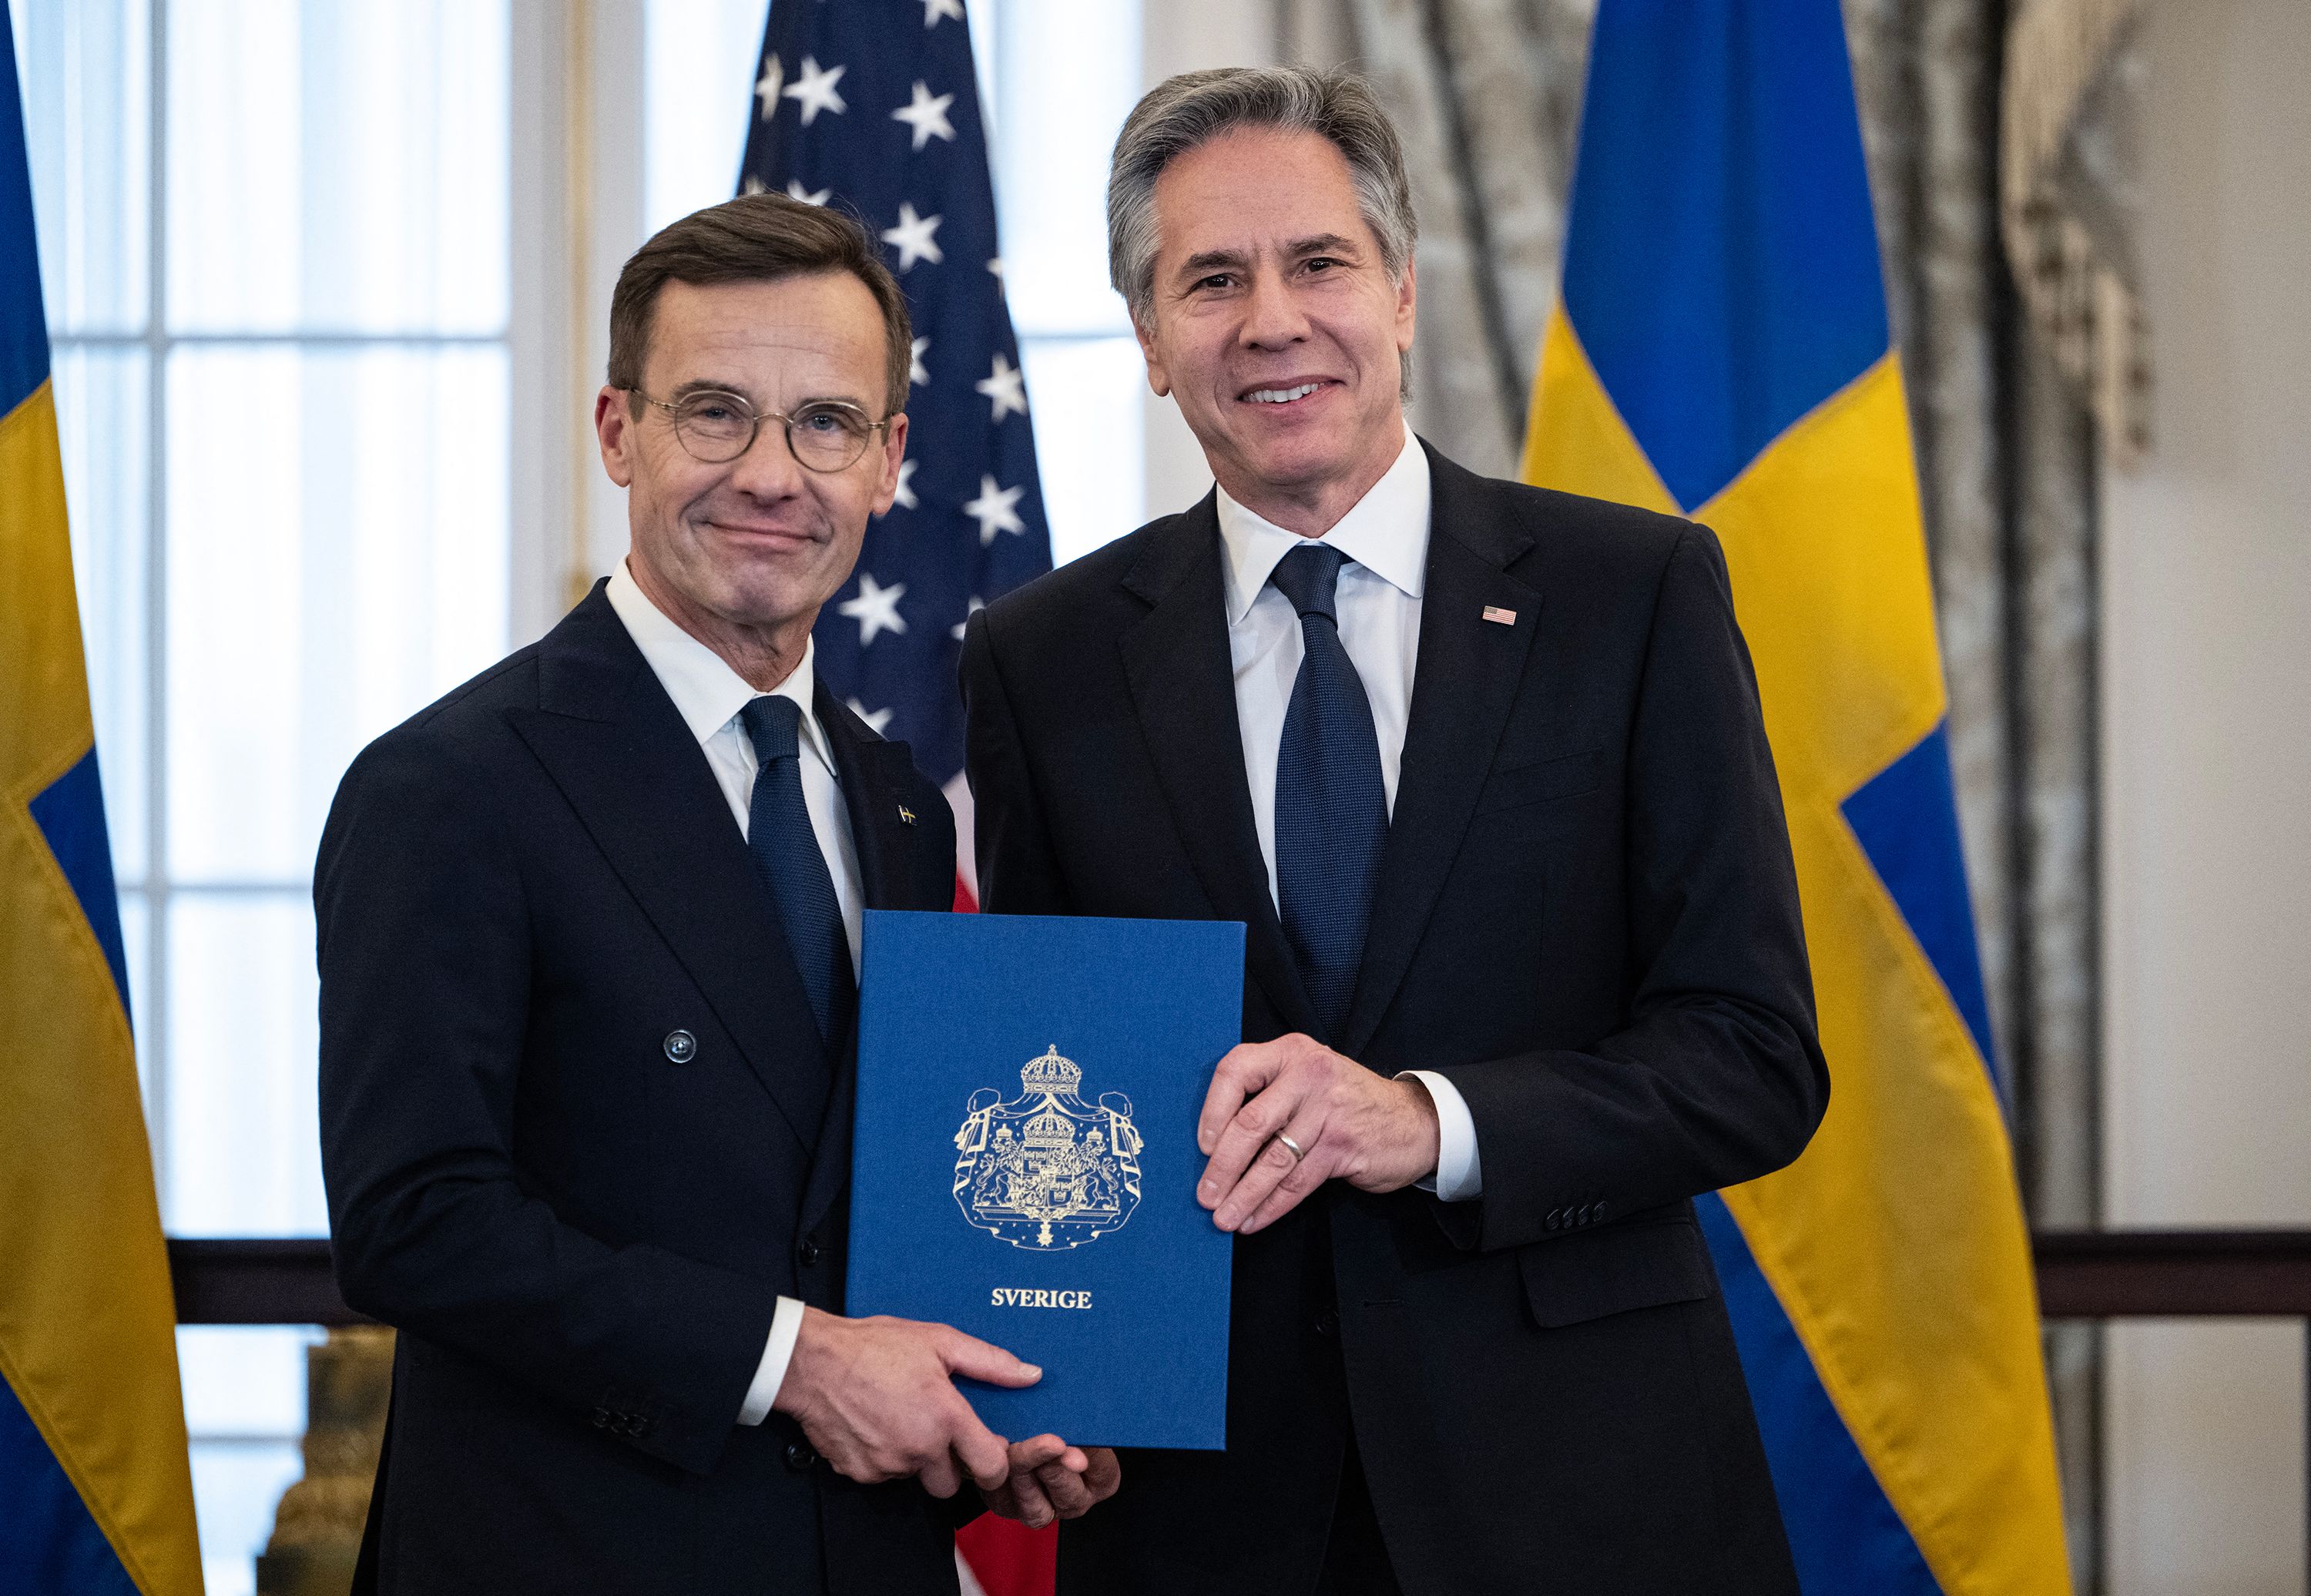 Sweden officially joins NATO, becoming alliance's 32nd member